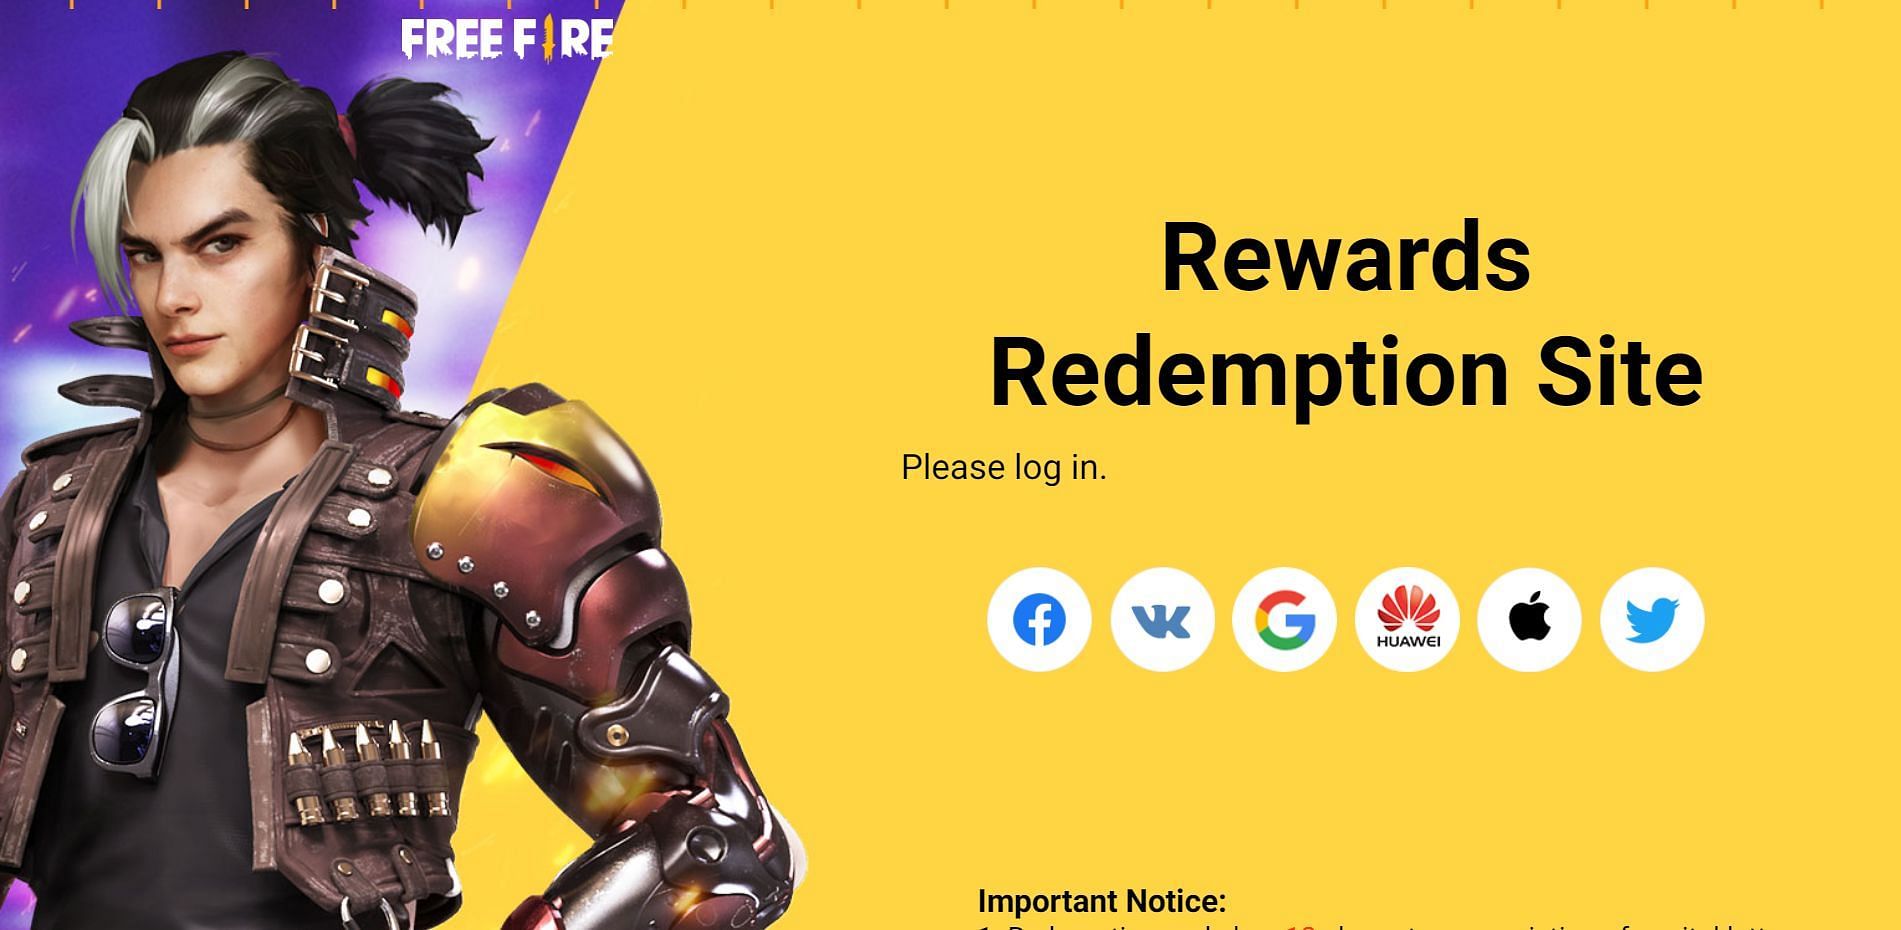 After arriving on the redemption site, users have to sign in through one of these methods (Image via Garena)